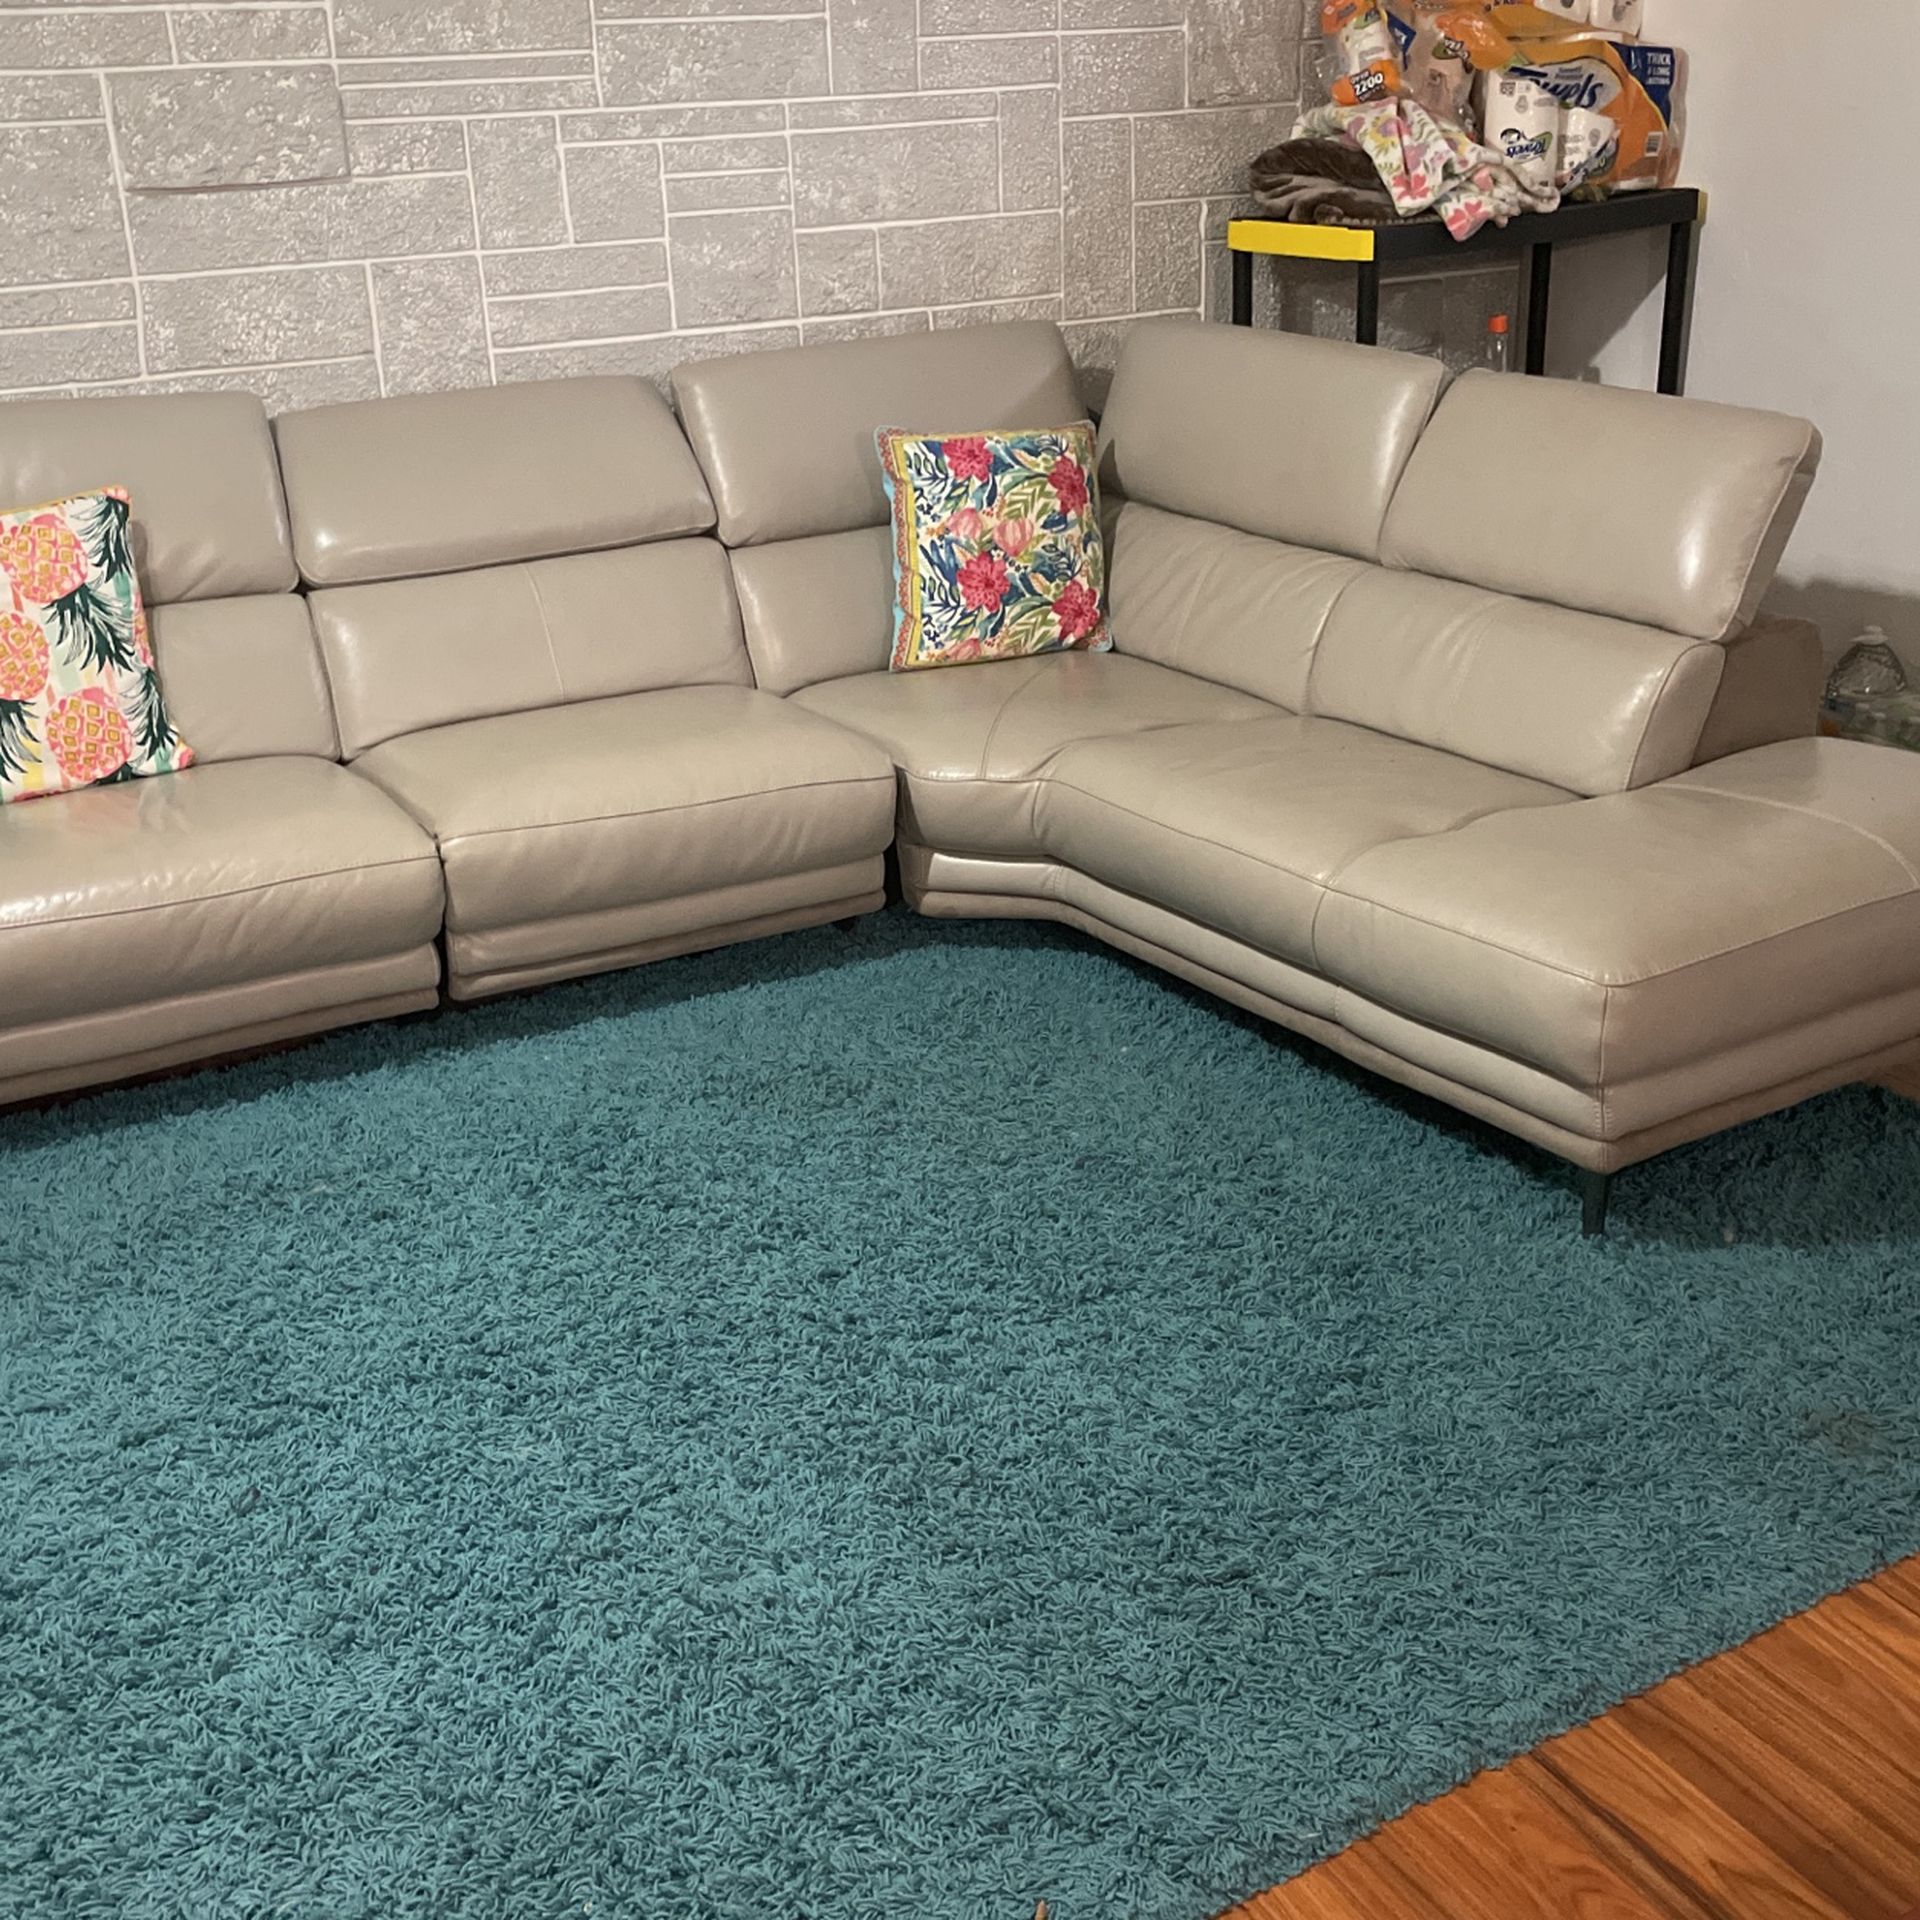 Crème Colored Couch With 2 Reclininers